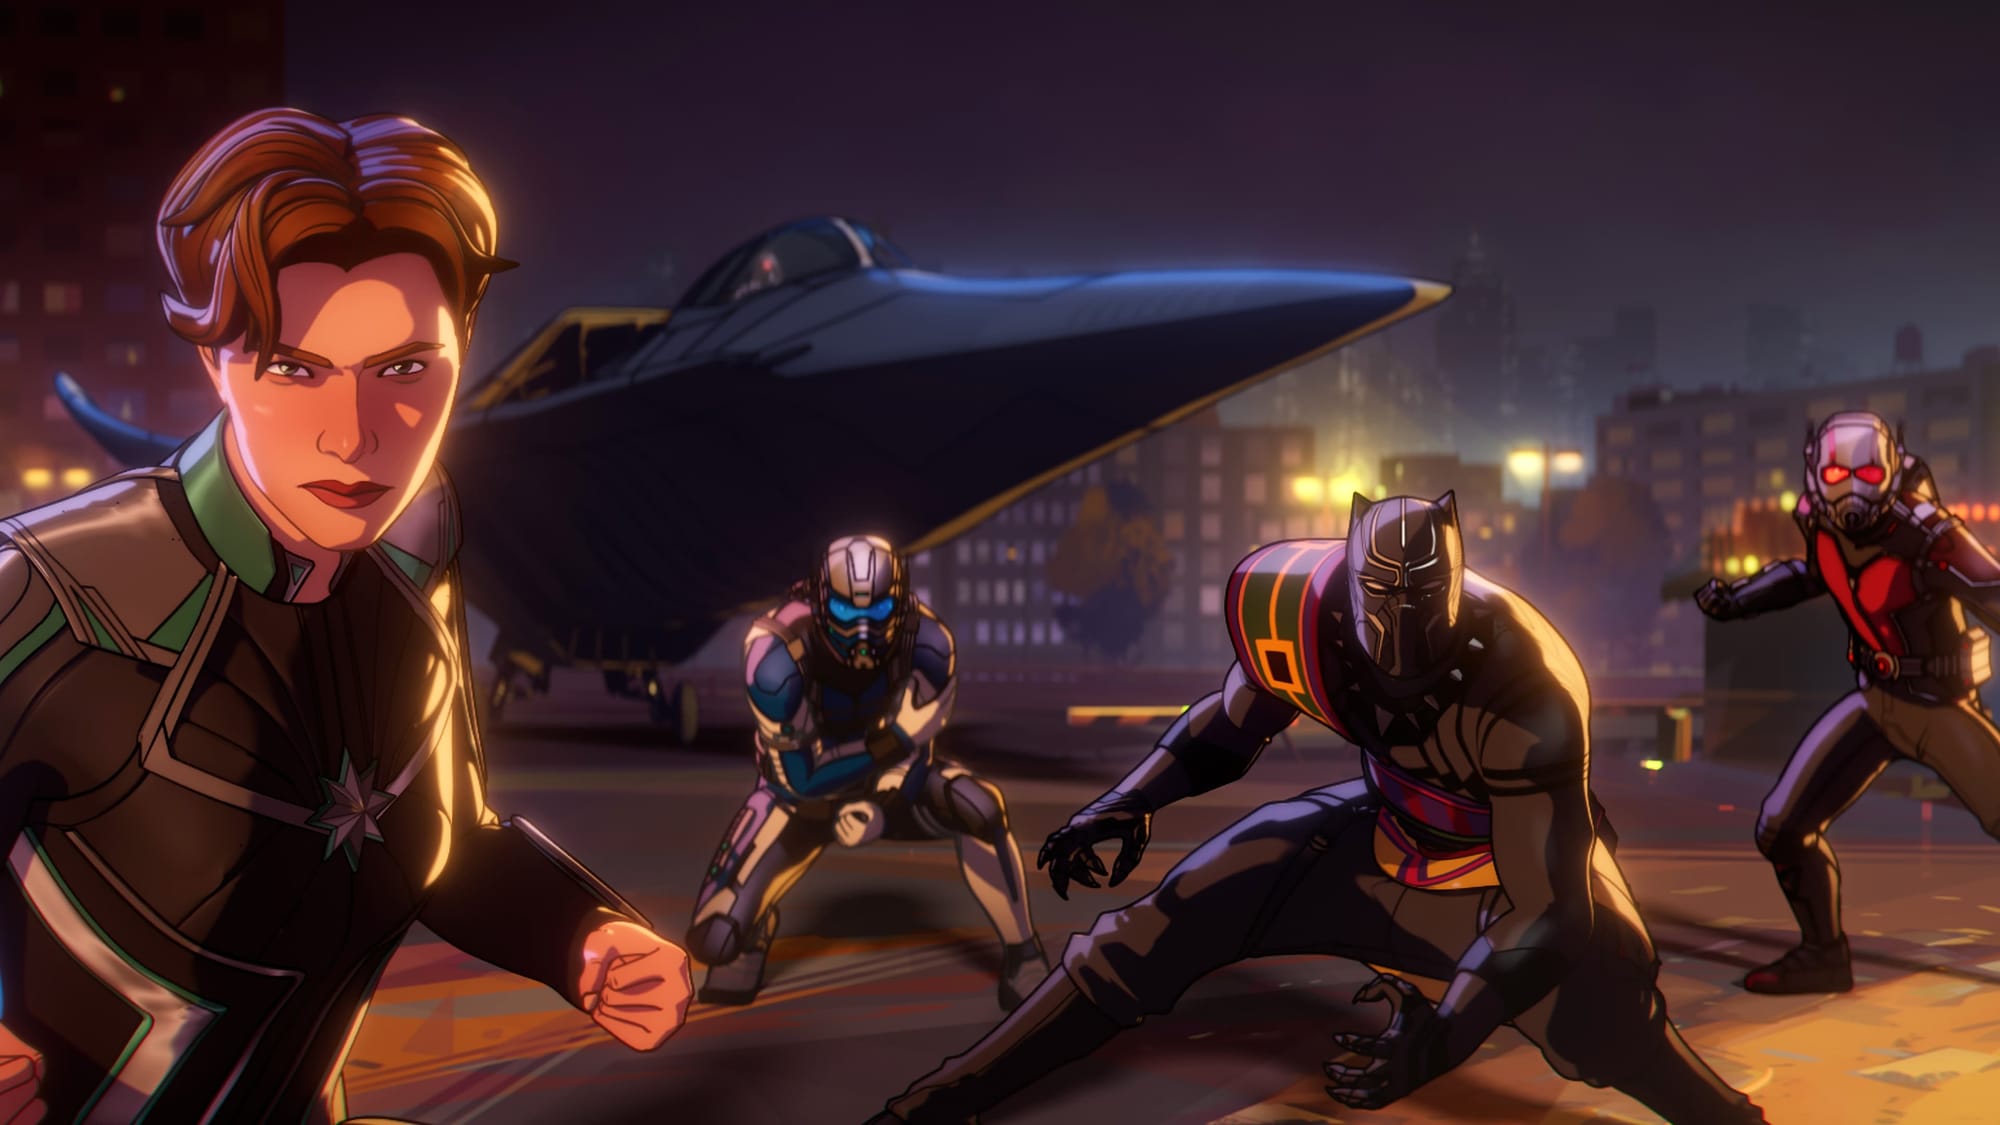 What If… Peter Quill Attacked Earth’s Mightiest Heroes? Episode Review